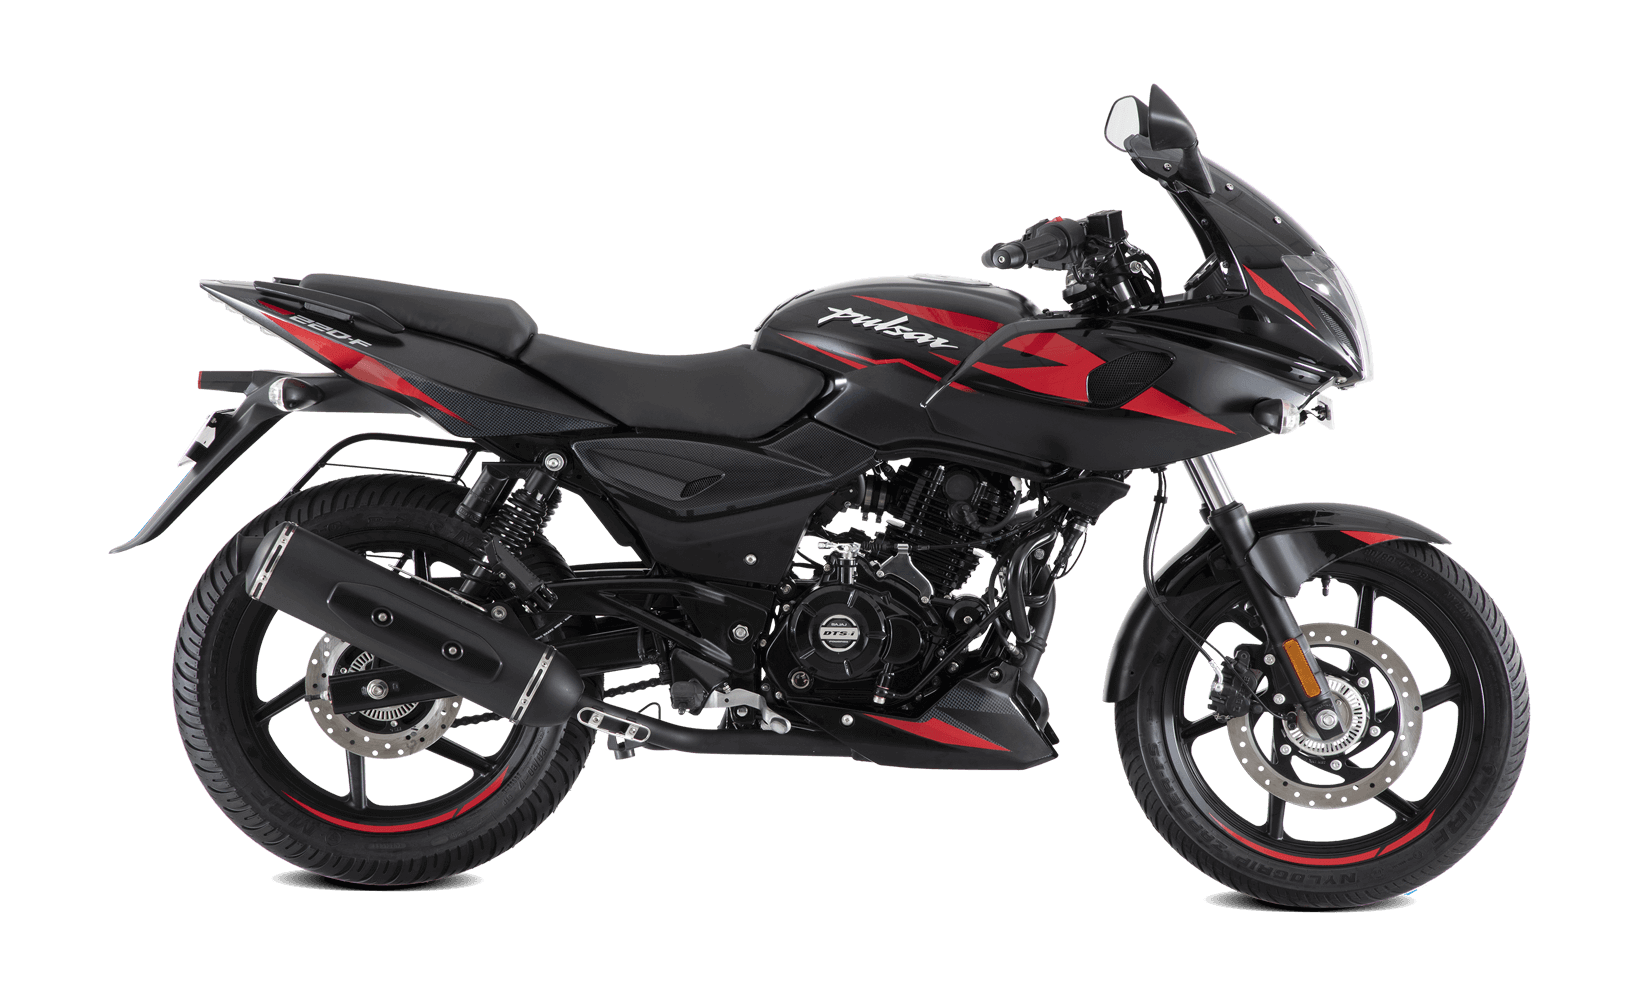 Pulsar 220F ABS New Black Mobile